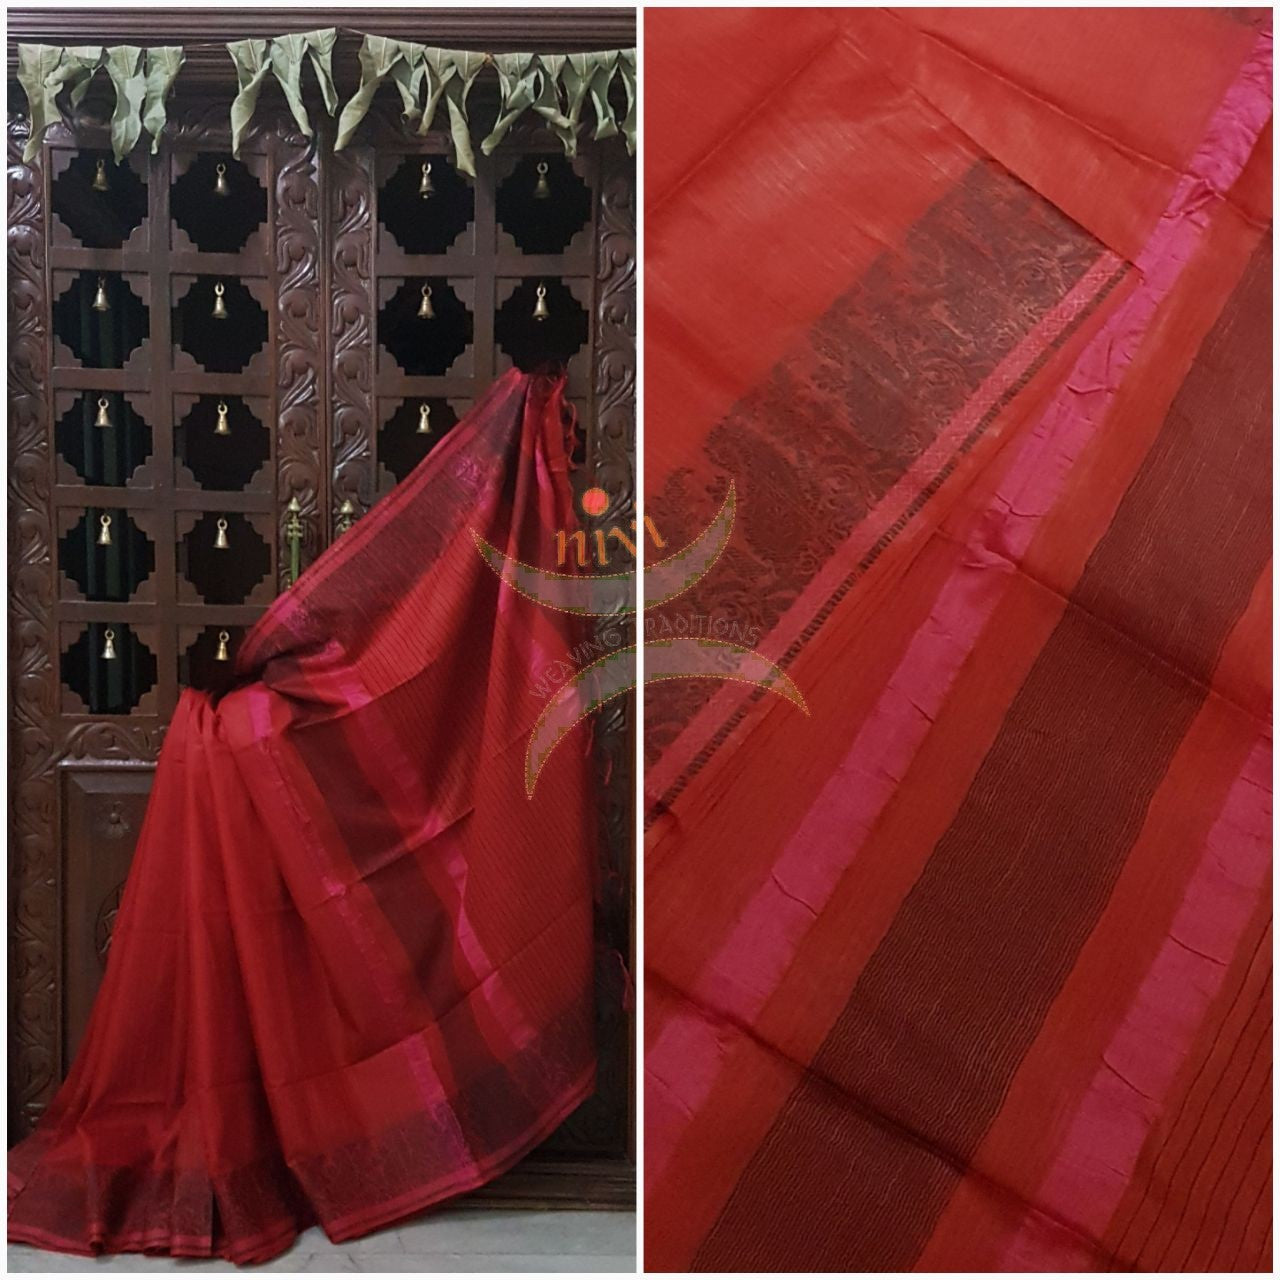 Red with black handloom cotton saree with traditional paisley woven border and striped pallu.